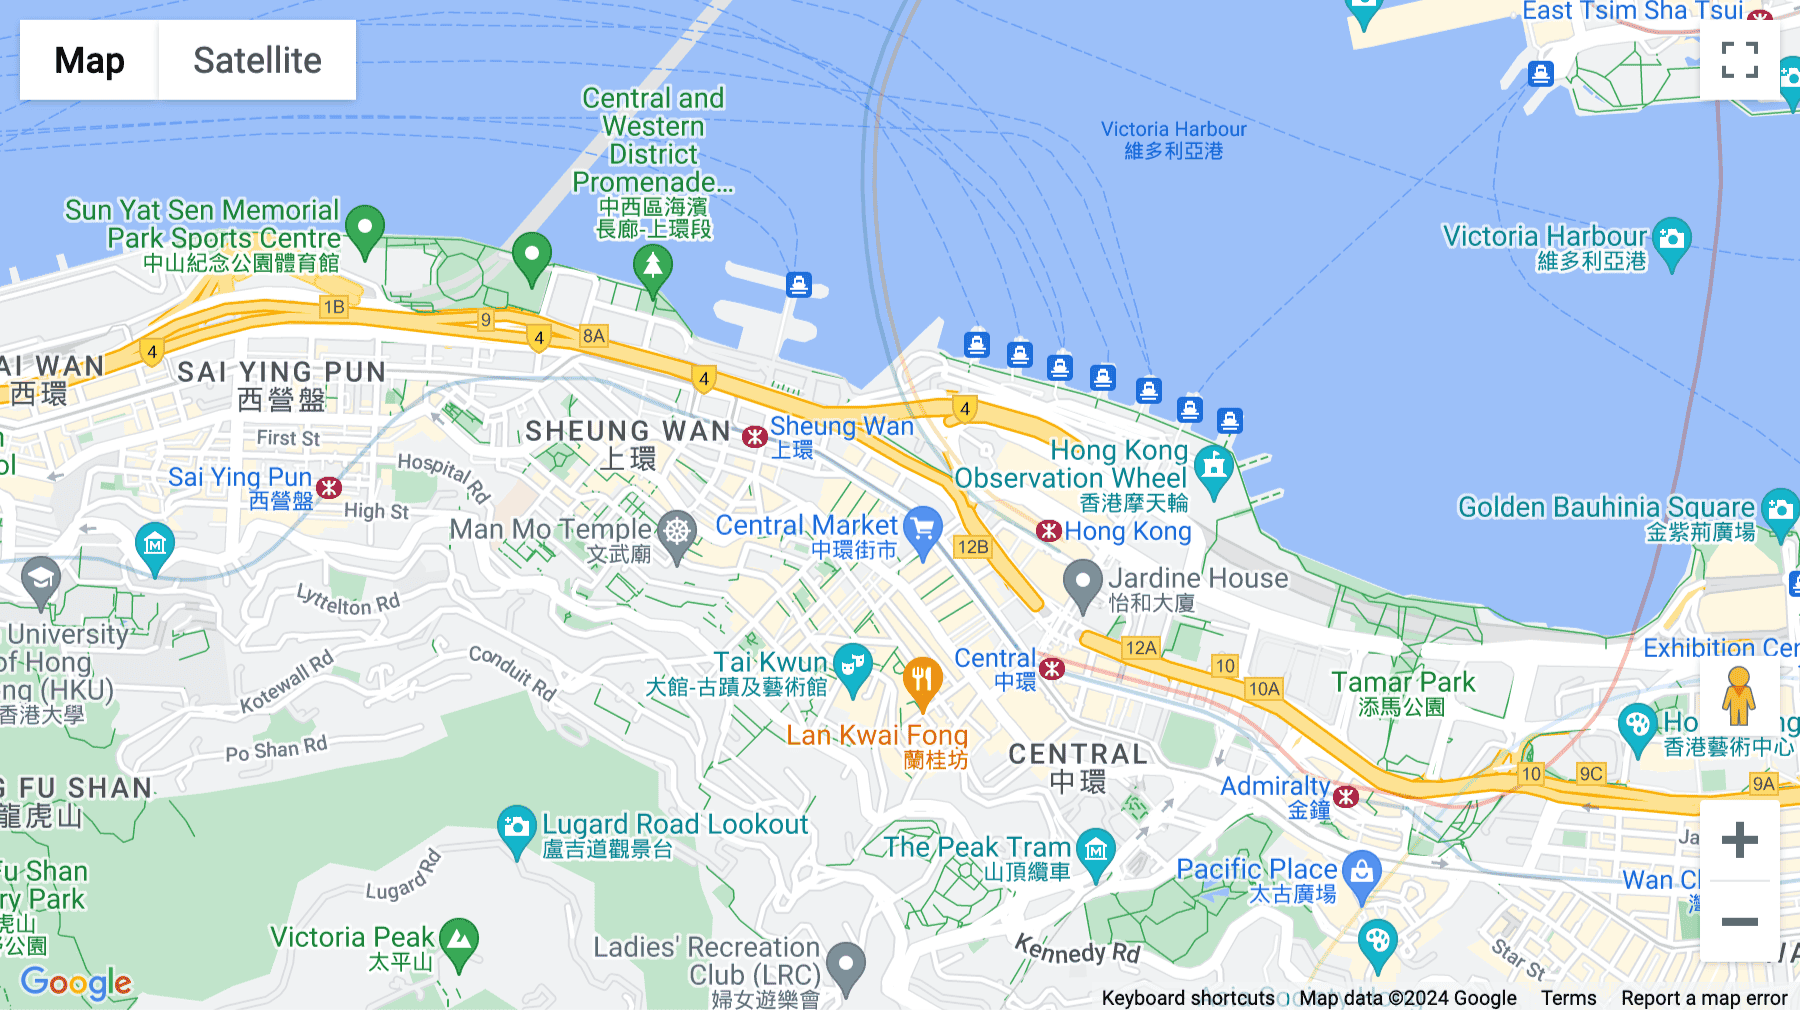 Click for interative map of Level 6, 9-12, BOC Group Life Assurance Tower, 136 Des Voeux Road Central, Sheung Wan, Hong Kong